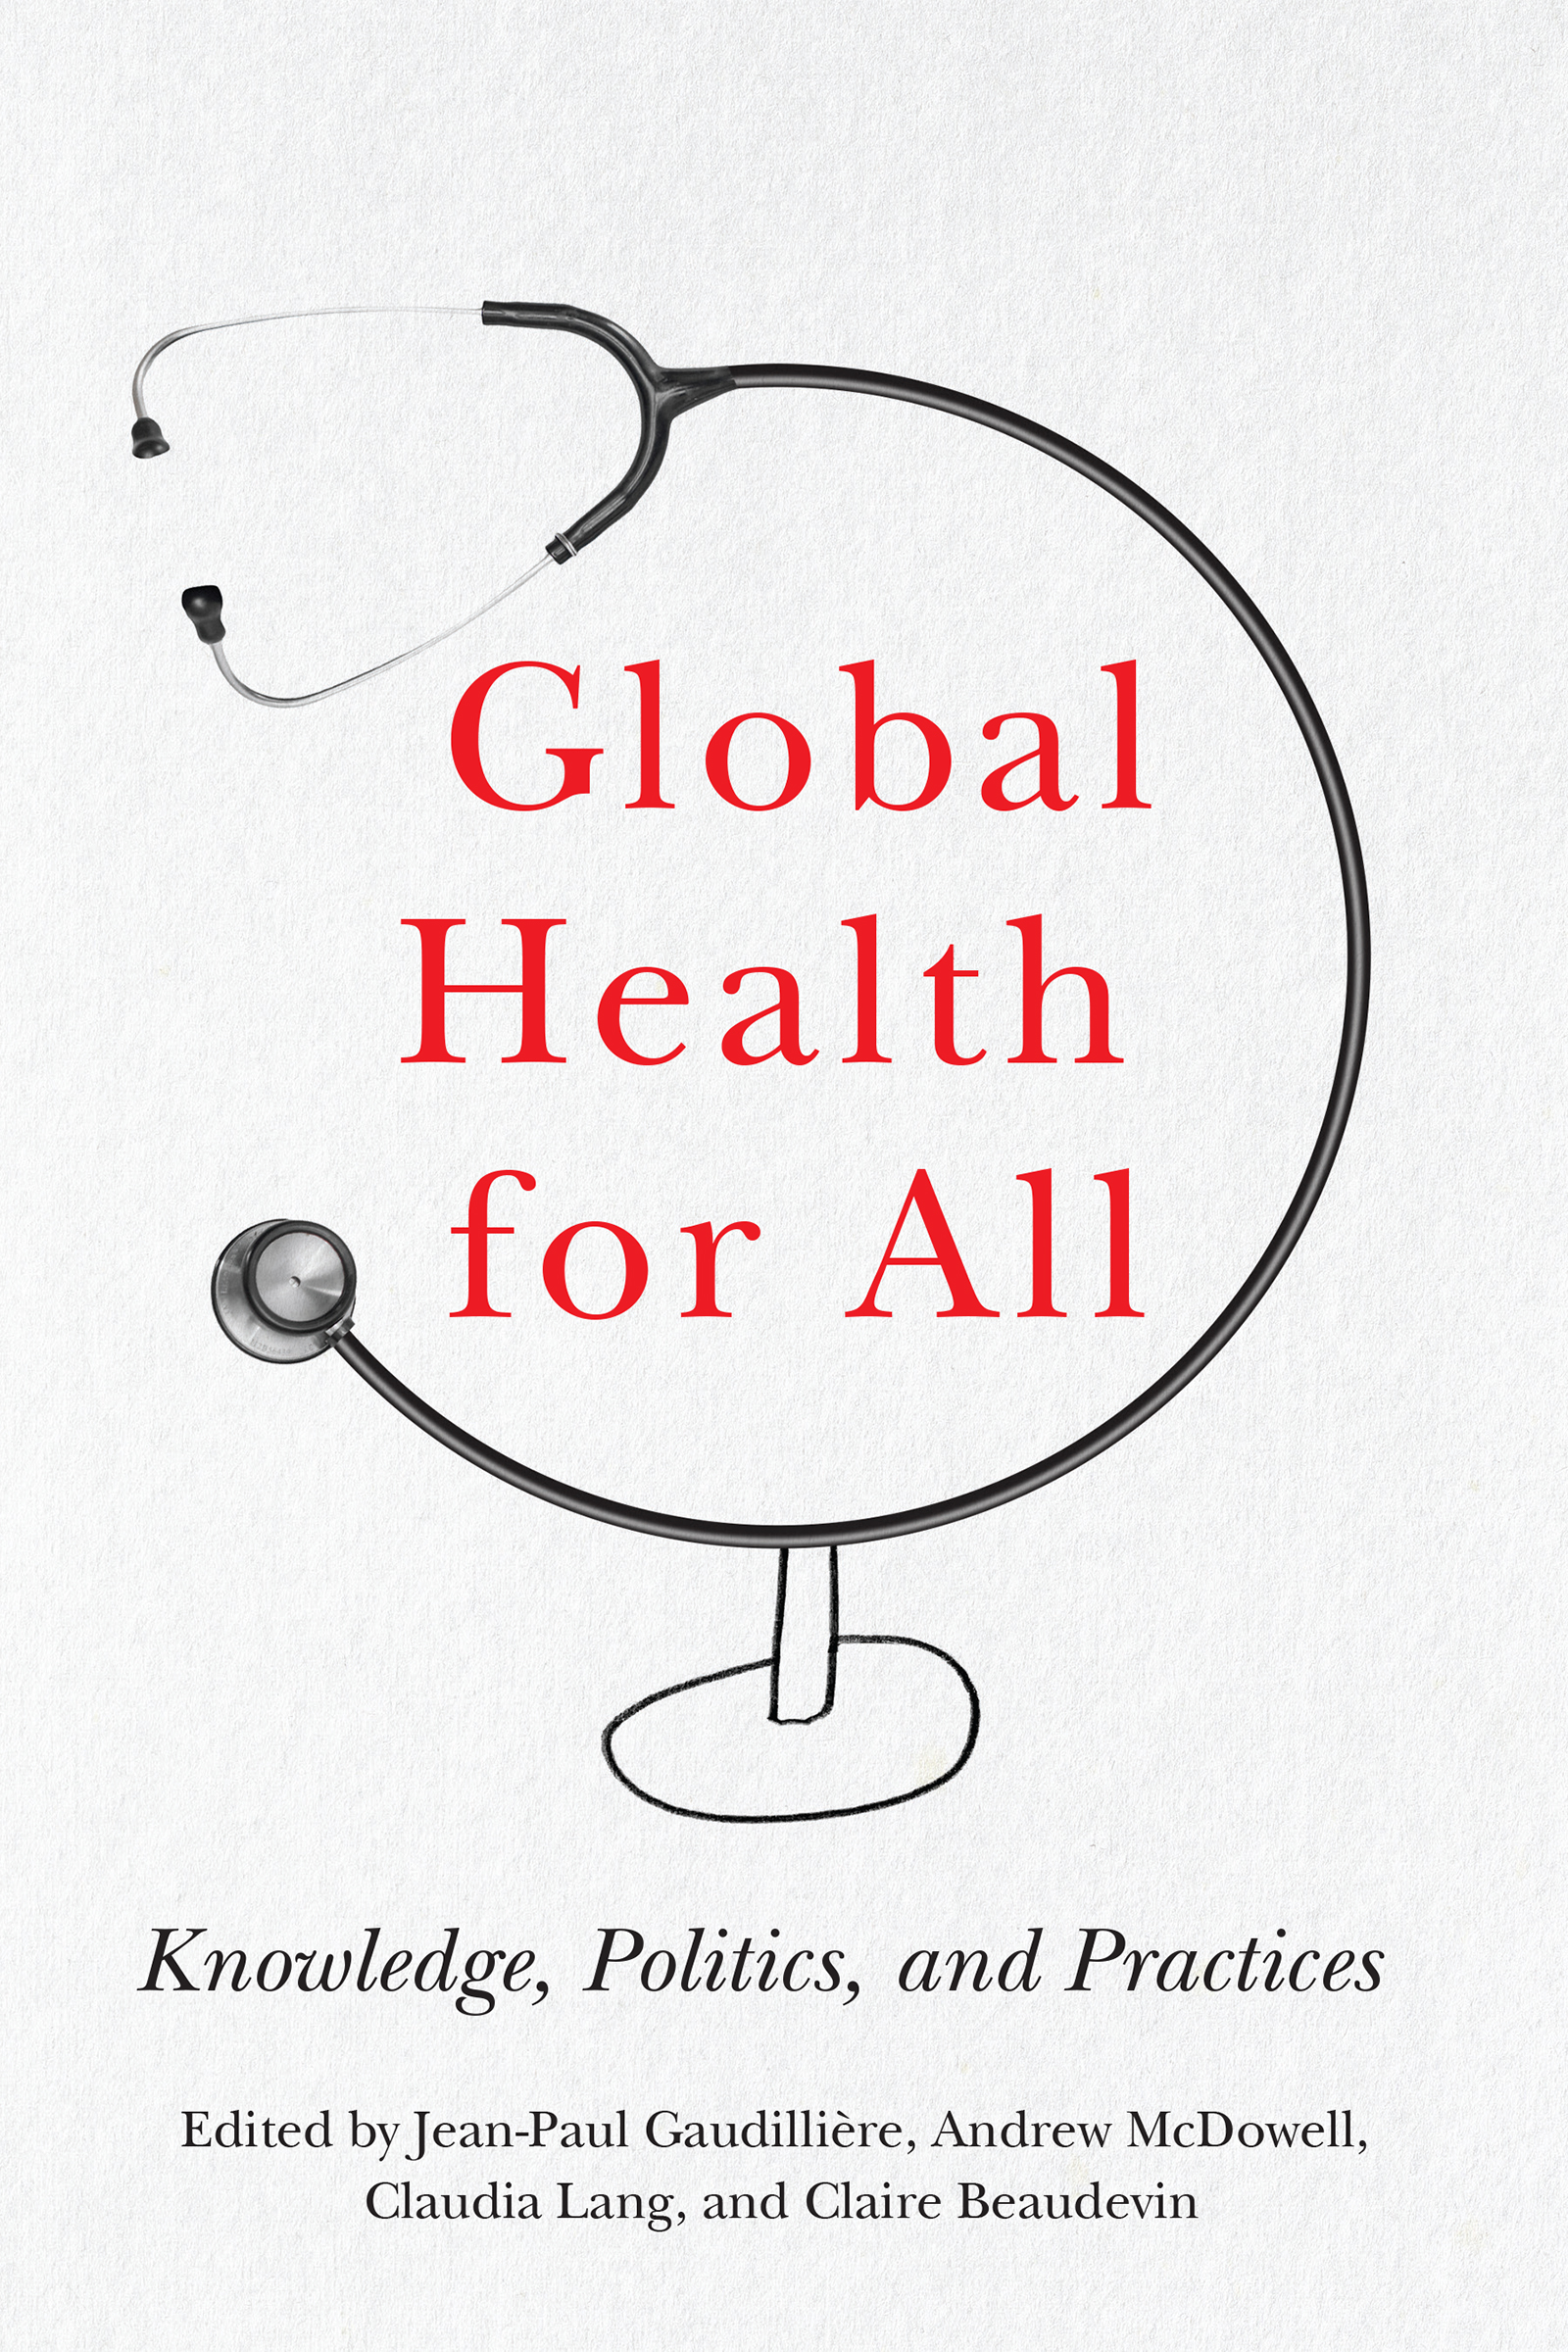 Global Health for All